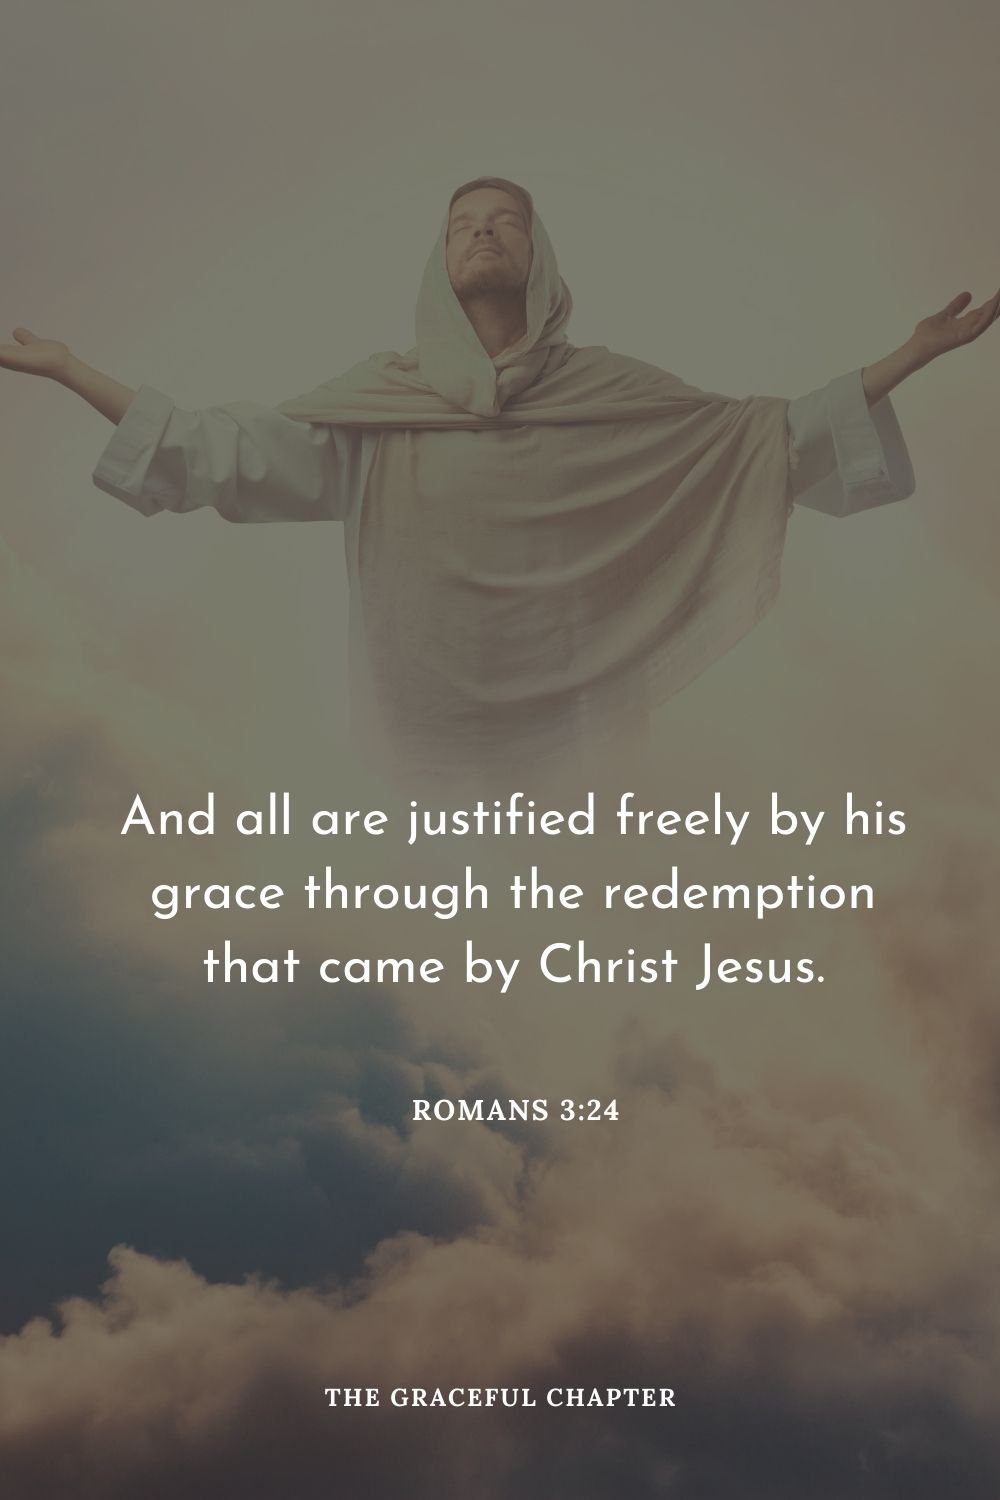 And all are justified freely by his grace through the redemption that came by Christ Jesus.